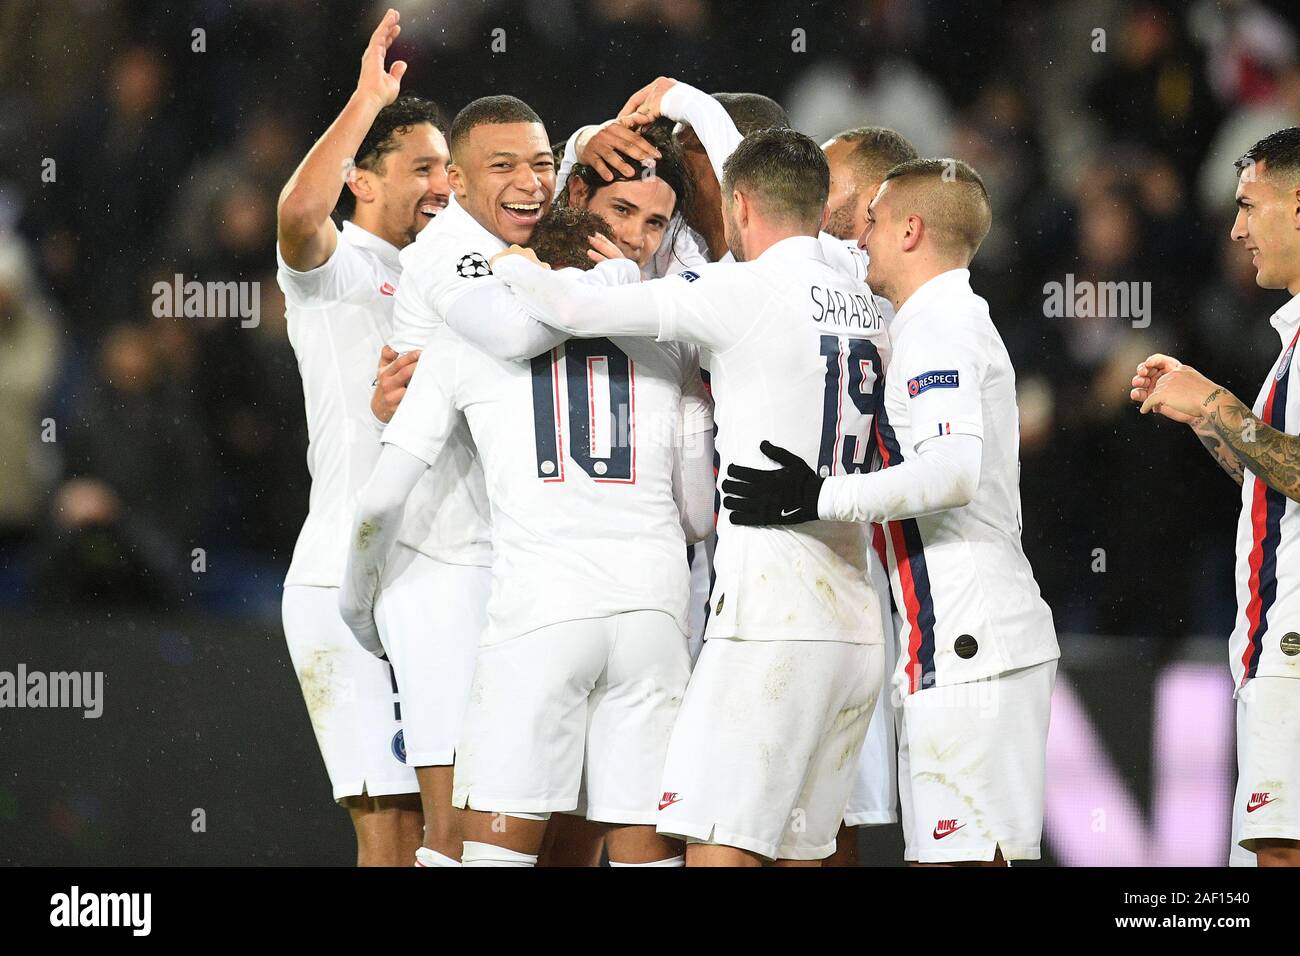 Paris, France. 11th Dec, 2019. Players of PSG celebrate their victory at  the end of a Group A match of the 2019-2020 UEFA Champions League between Paris  Saint-Germain (PSG) and Galatasaray in